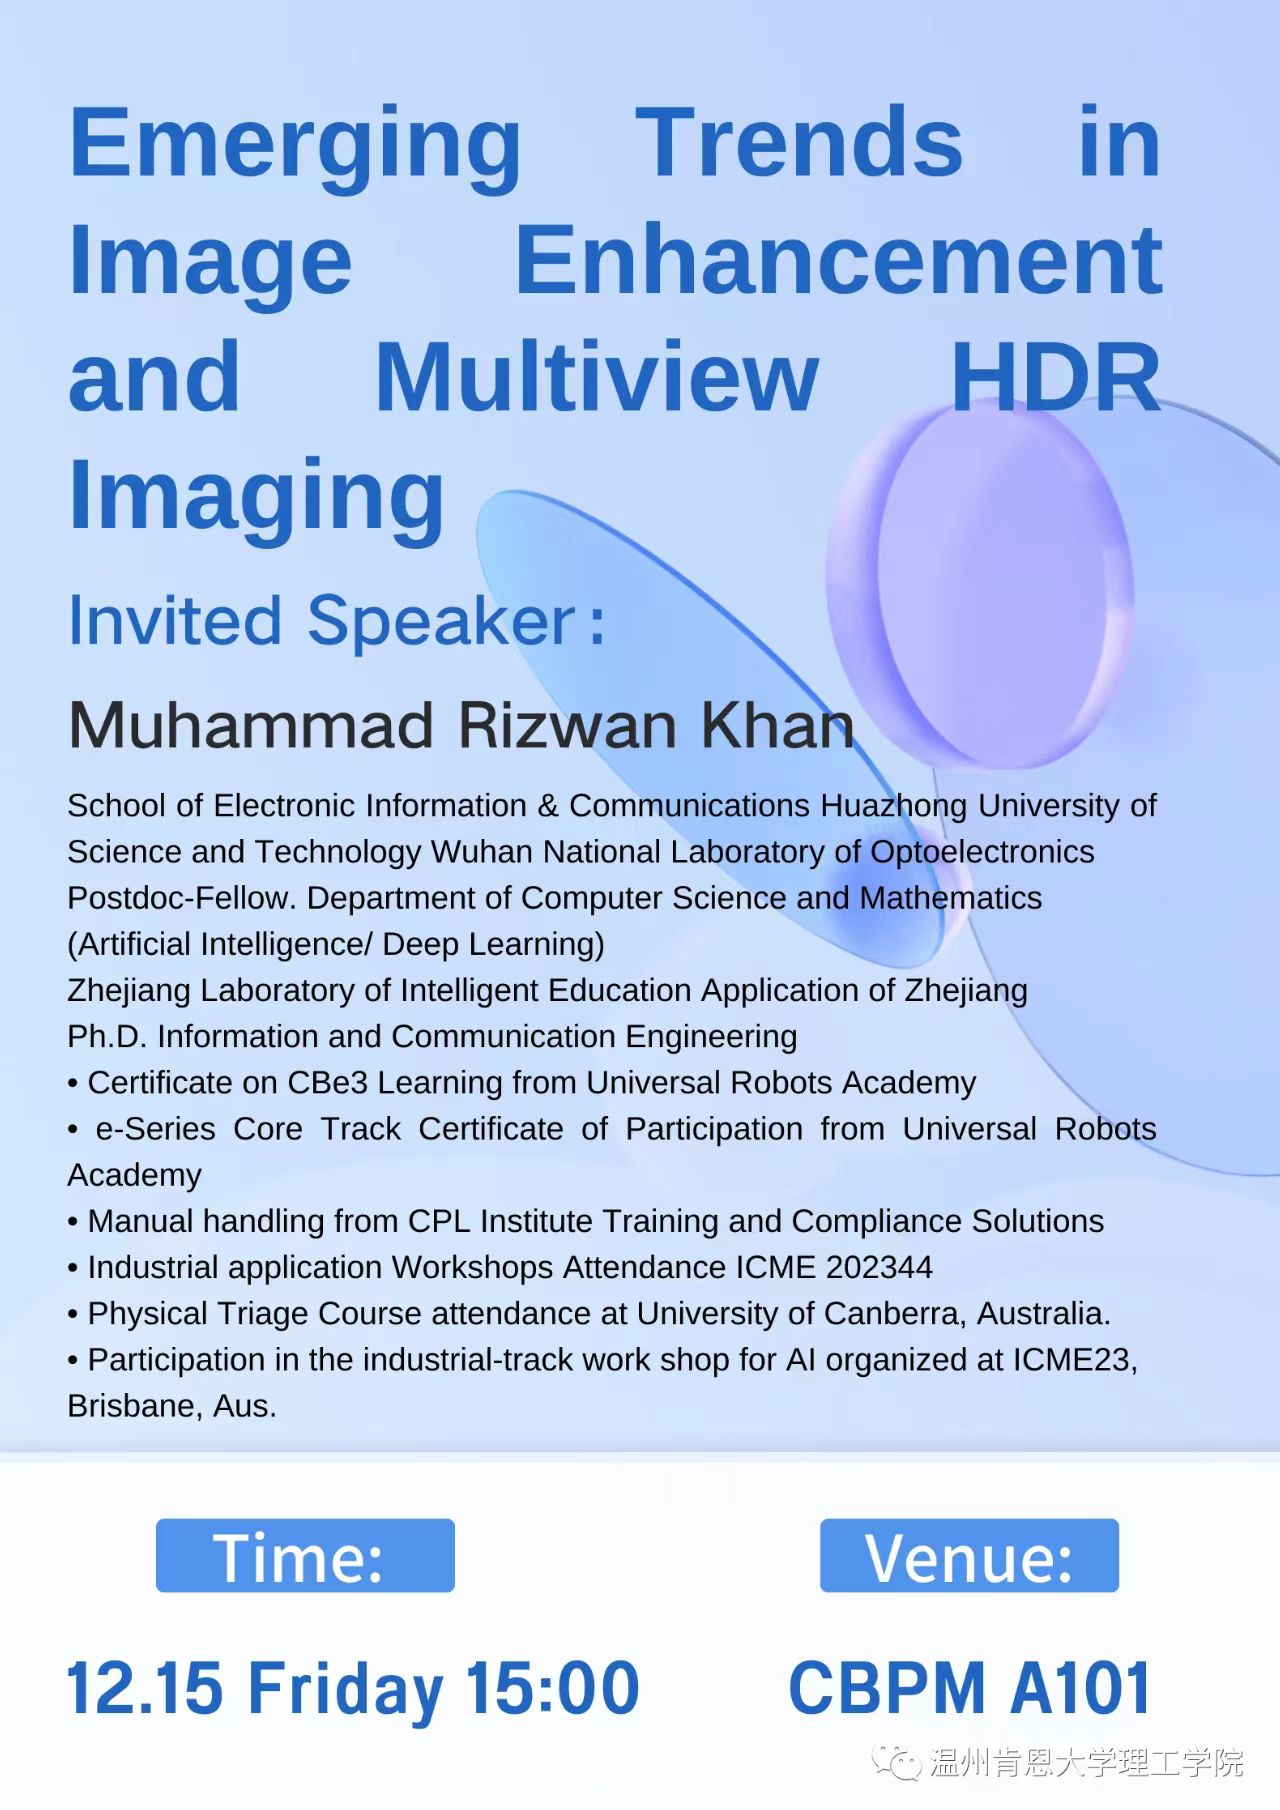 Emerging Trends in Image Enhancement and Multiview HDR Imaging